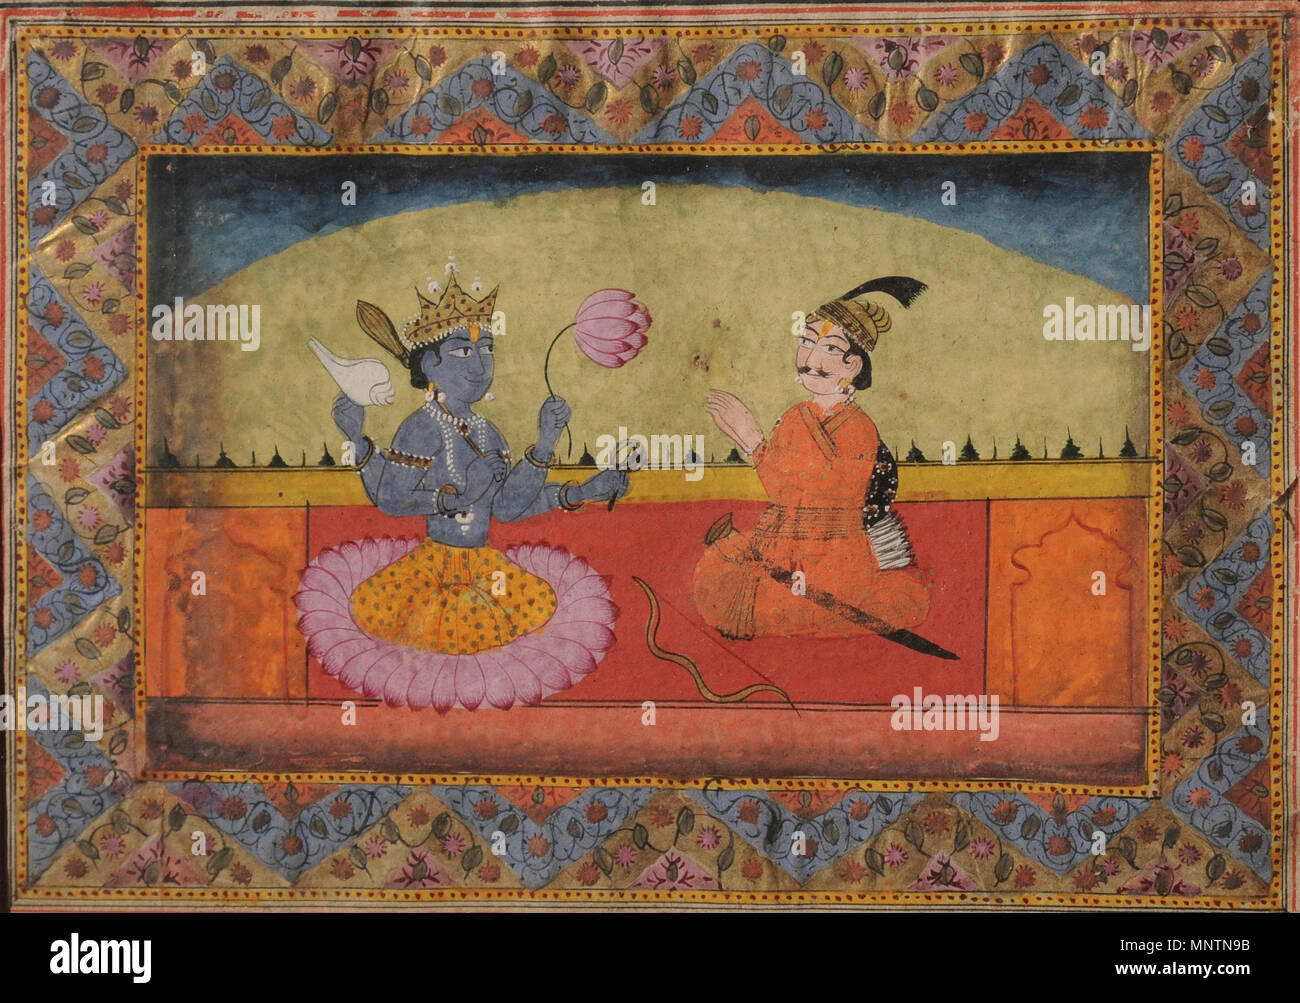 Raja Parikshit seated in front of Vishnu .  English: Raja Parikshit seated in front of Vishnu - Unknown, Miniature Painting, Kashmir School - Google Cultural Institute. Natural pigment on paper. 9.8 x 13.6 cm. This seems to be a folio of a manuscript with elaborate geometrical and floral borders. The style is Kashmiri with tiny figures and typical colours of orange, green, mauve and blue forming the plain compartments. This is the beginning verse from the Bhagvata Purana when Raja Parikshit has come to Vishnu. . between 1801 and 1825.   1040 Raja Parikshit seated in front of Vishnu - Unknown,  Stock Photo